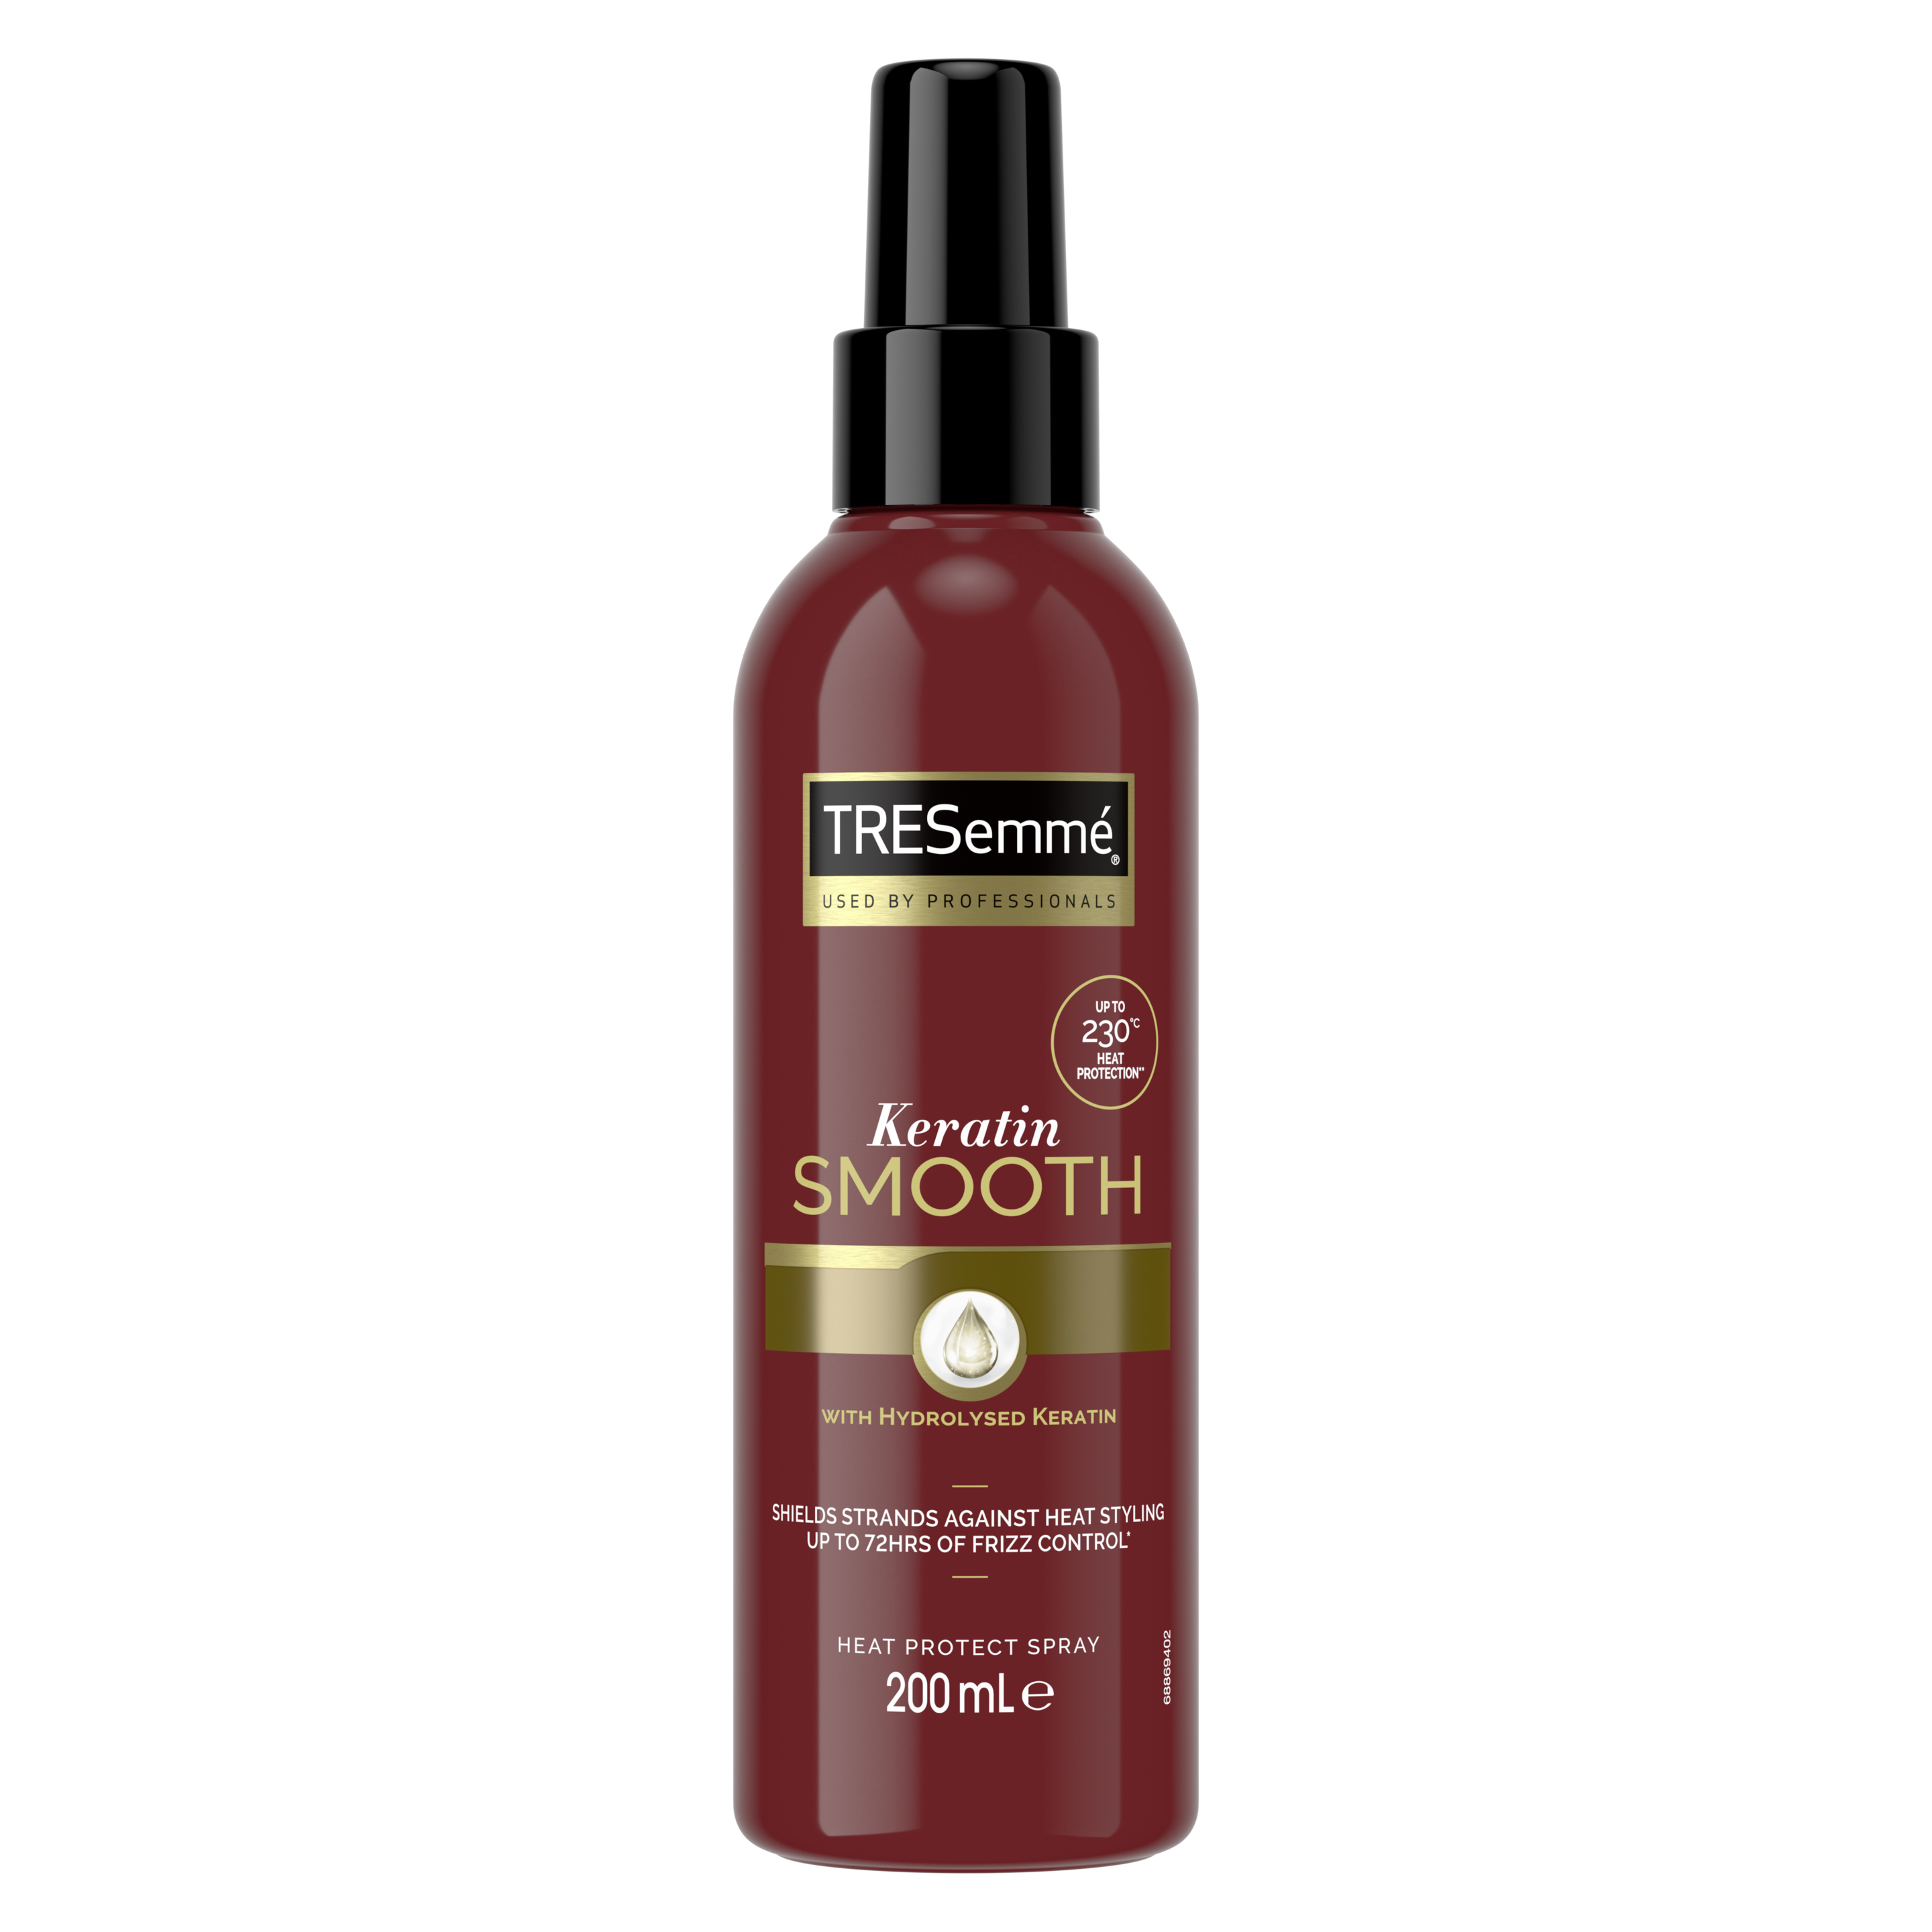 A 200ml bottle of TRESemmé Keratin Smooth Heat Protect Spray front of pack image